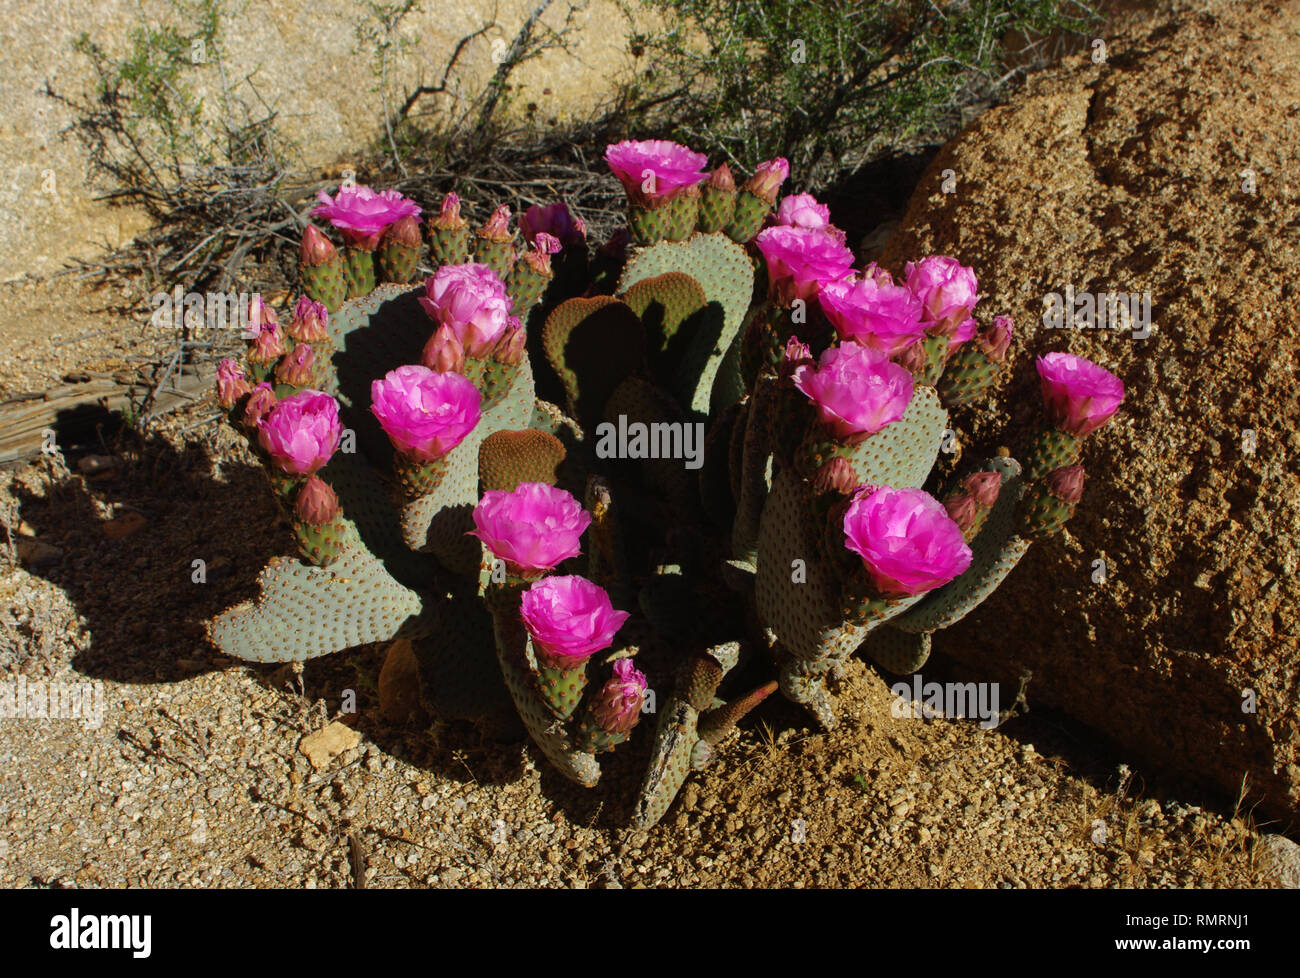 A blooming prickly pear cactus with bright pink blossoms found in the Mojave desert of southern California. Stock Photo